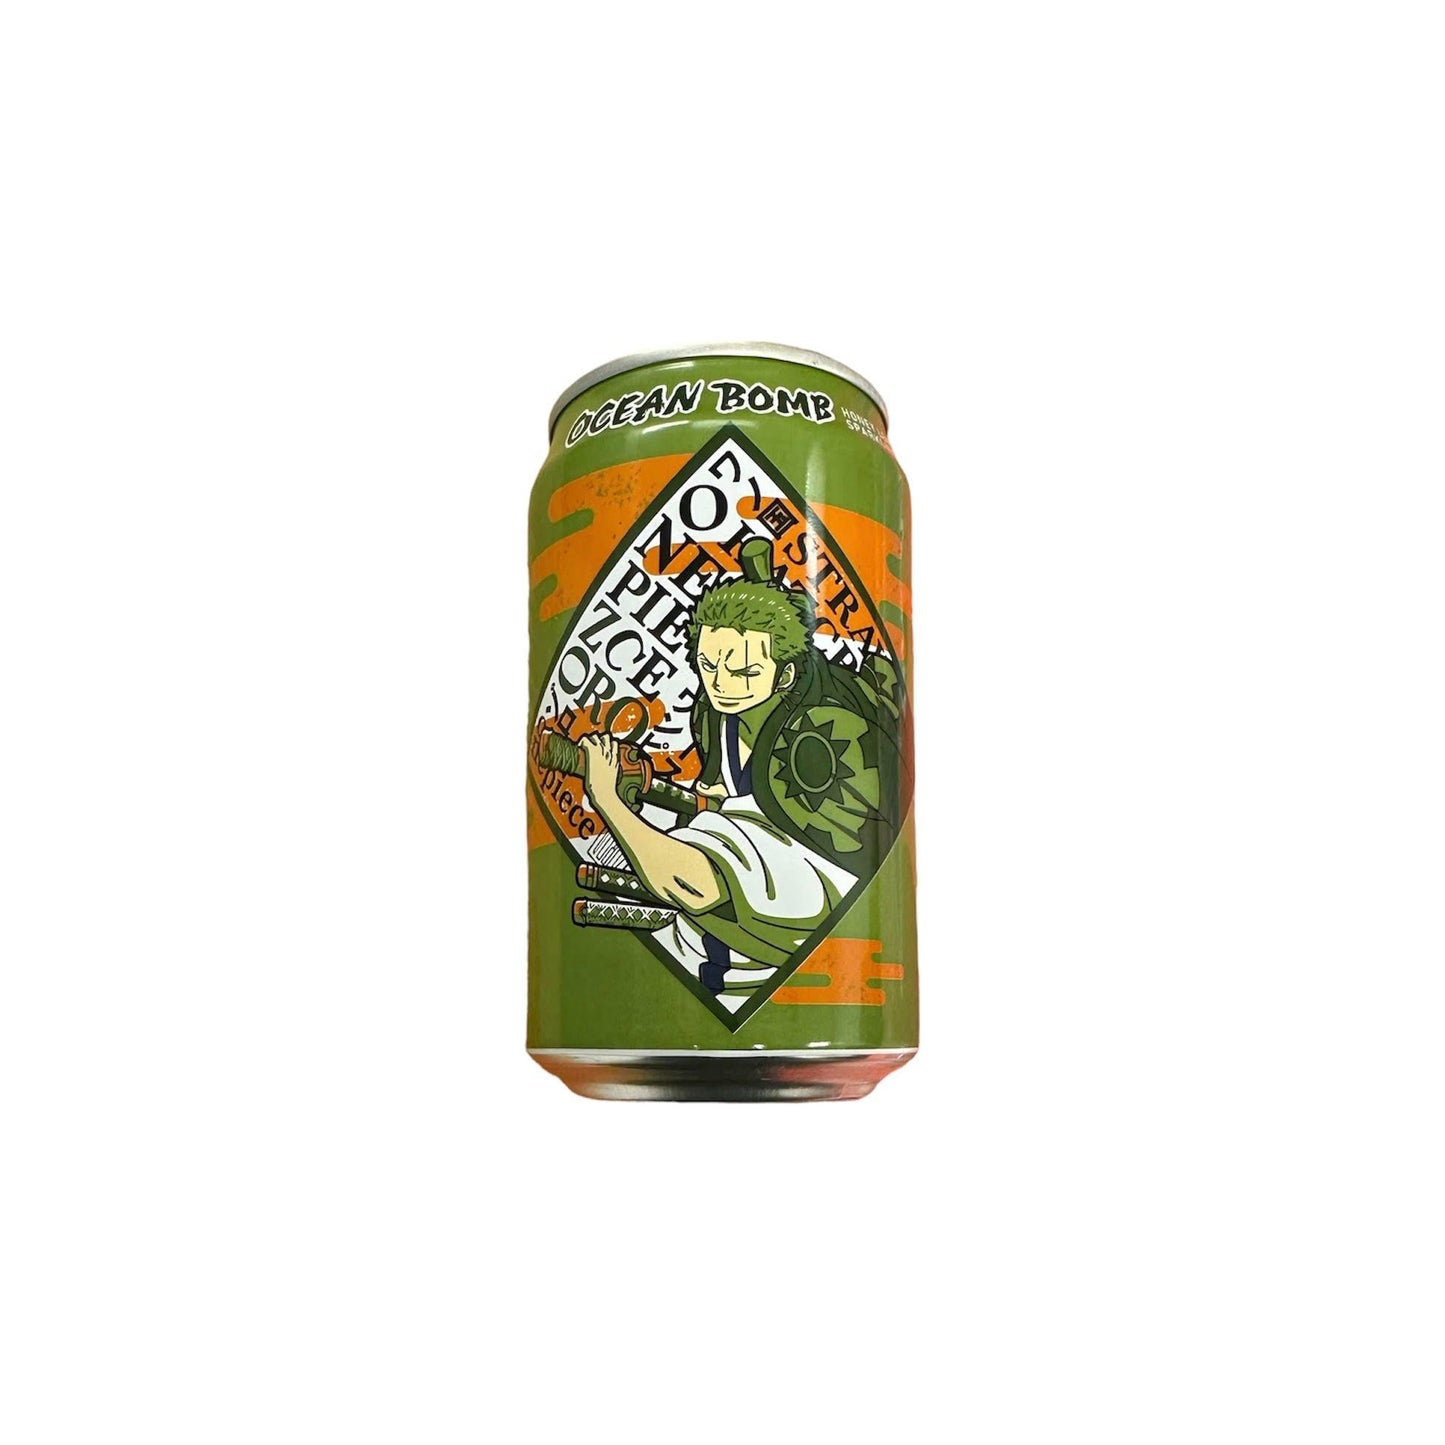 Ocean Bomb One Piece Zoro Honey Lime 330ml 24ct (Shipping Extra, Click for Details)